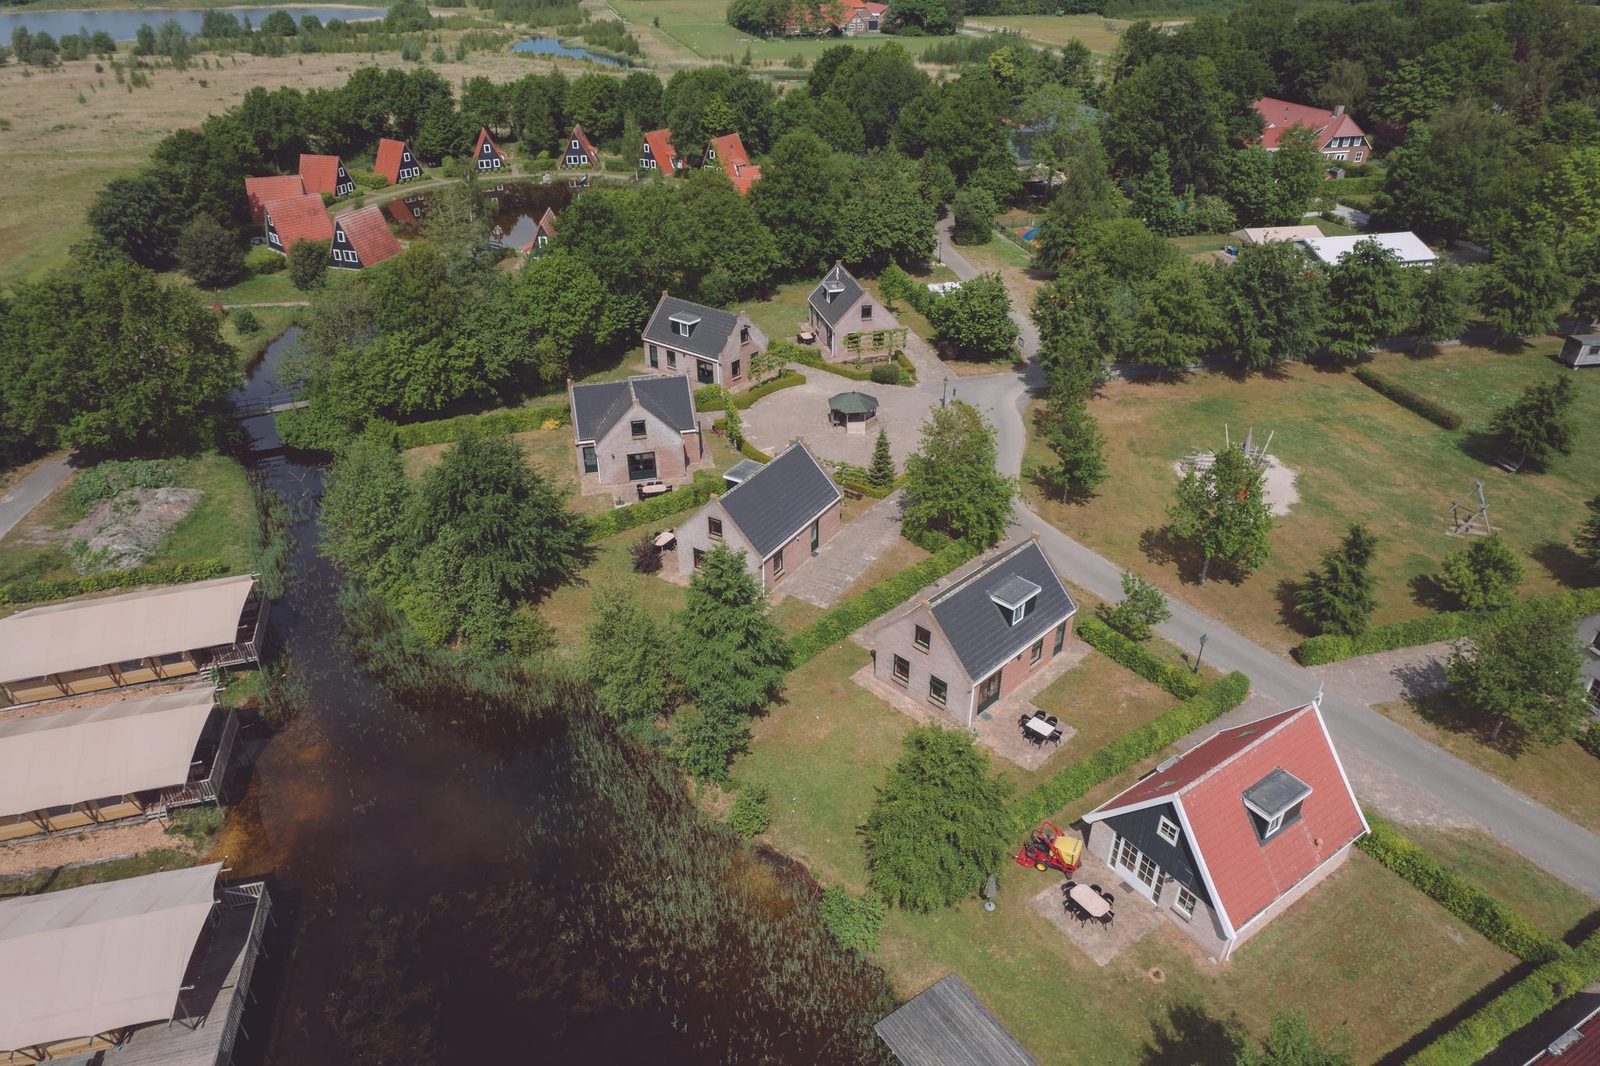 Group accommodation: 'Het Strandhuis' + 4 comfortable houses (24 people)